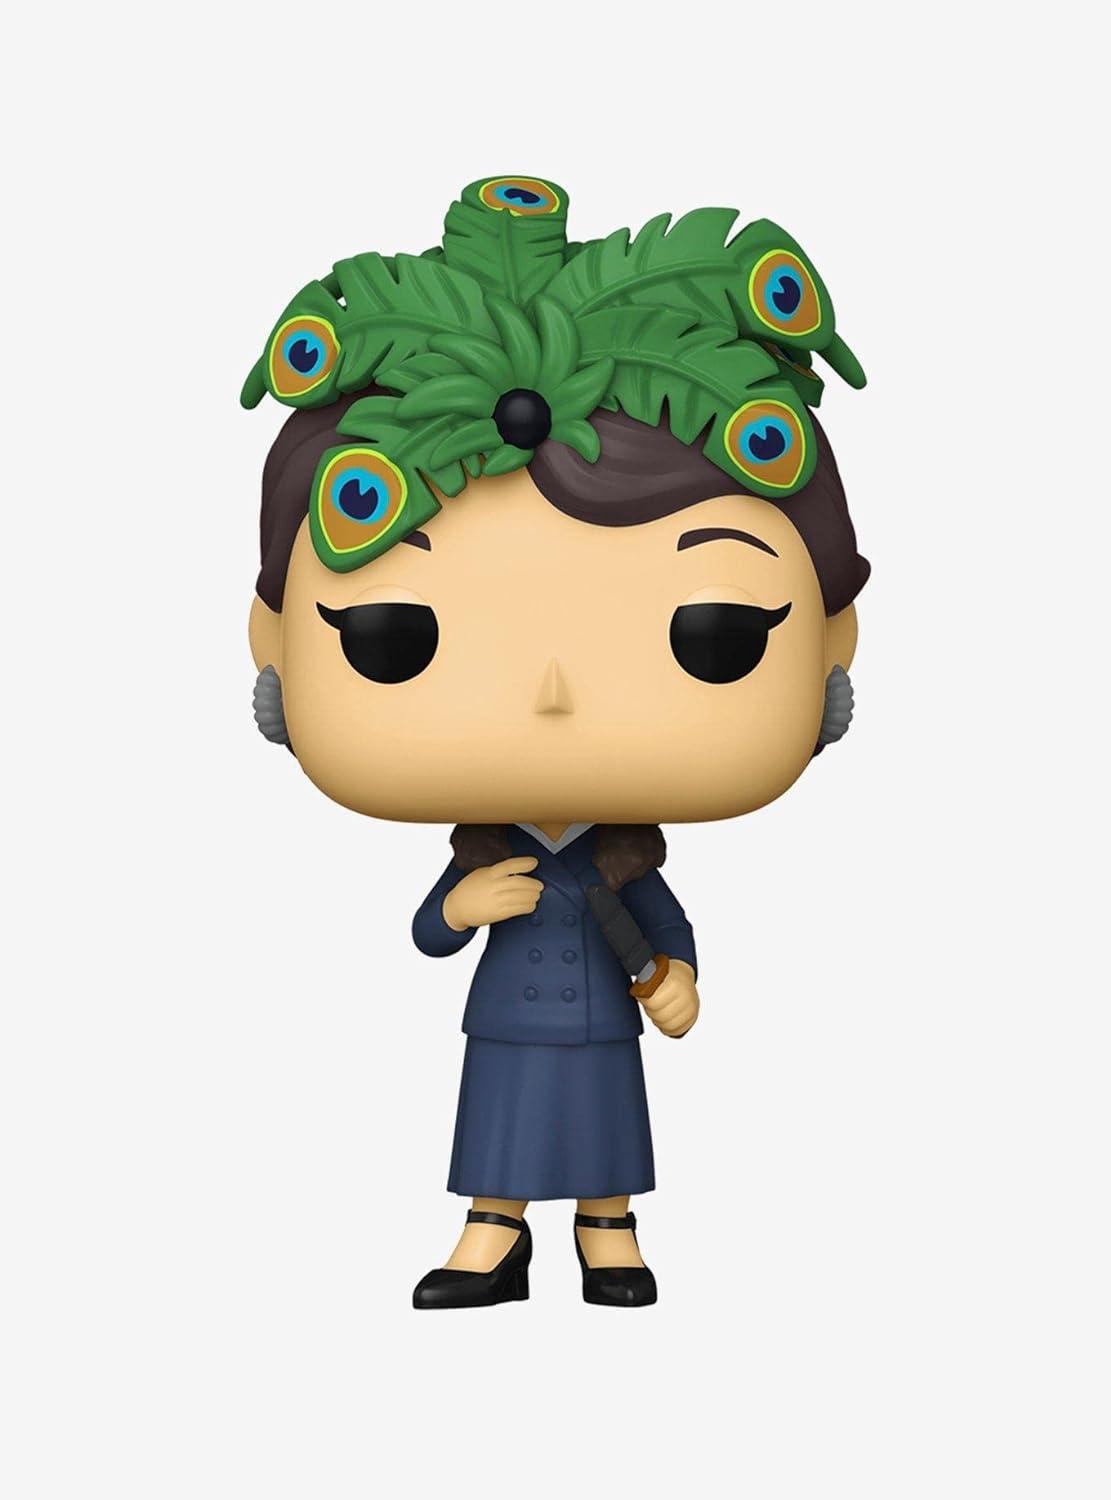 Clue: Funko Pop! Retro Toys - Mrs. Peacock with the knife #52 - Magic Dreams Store